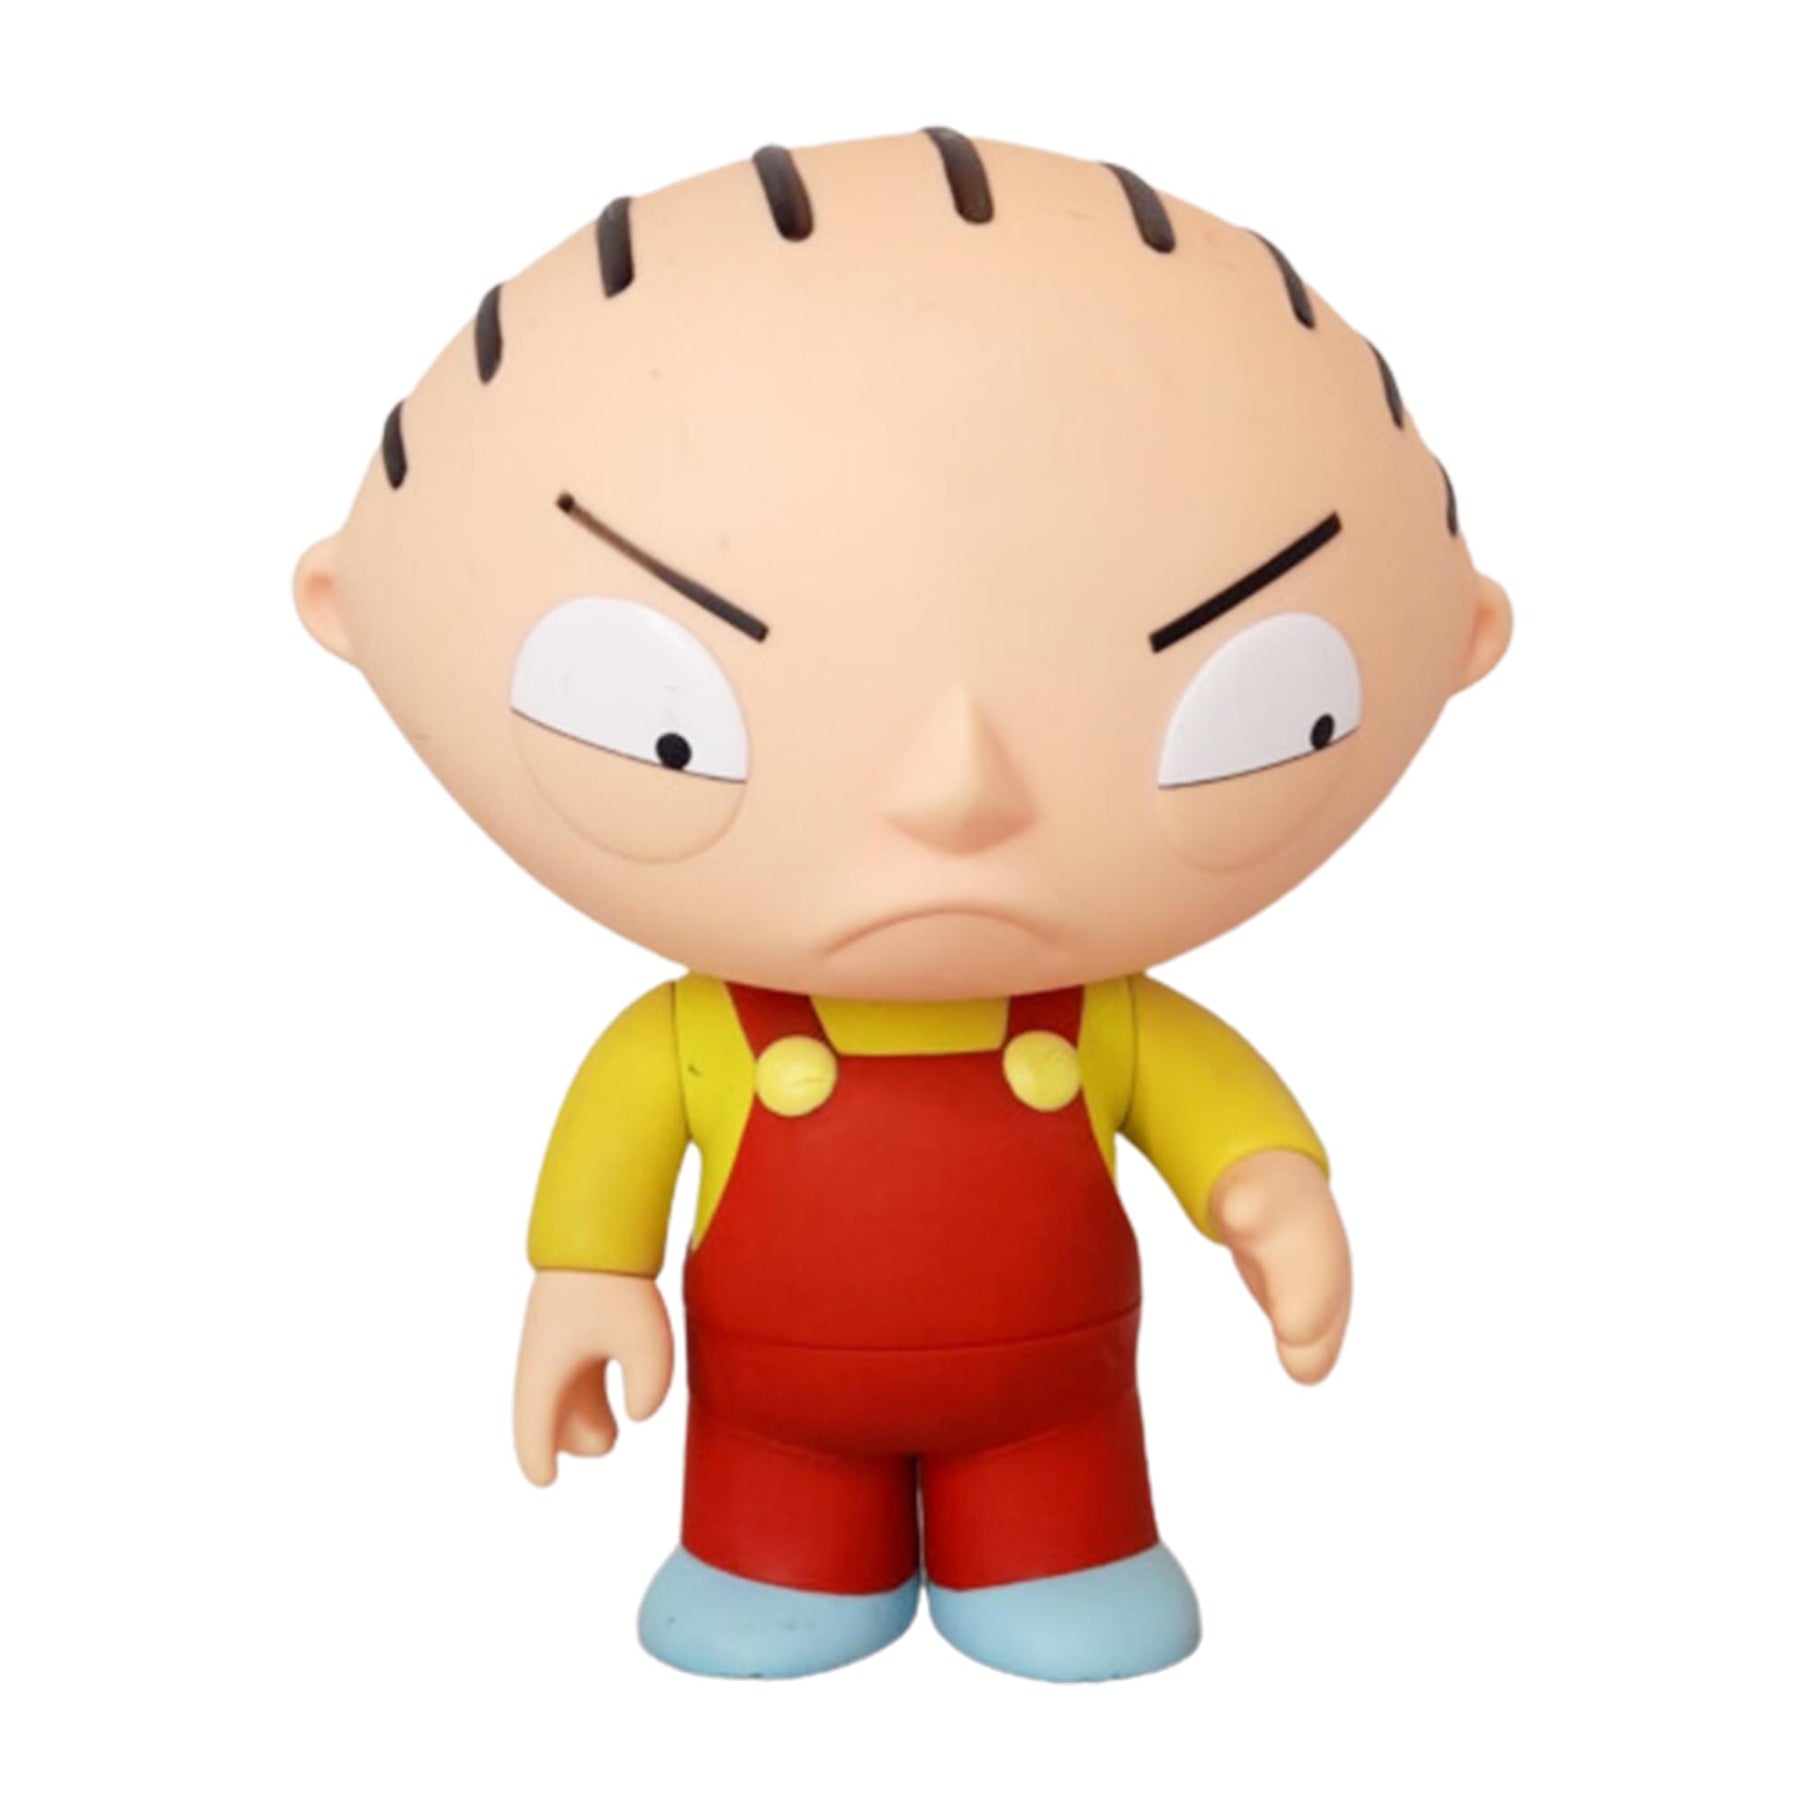 Family Guy Classic Stewie Griffin 6" Scale Figure